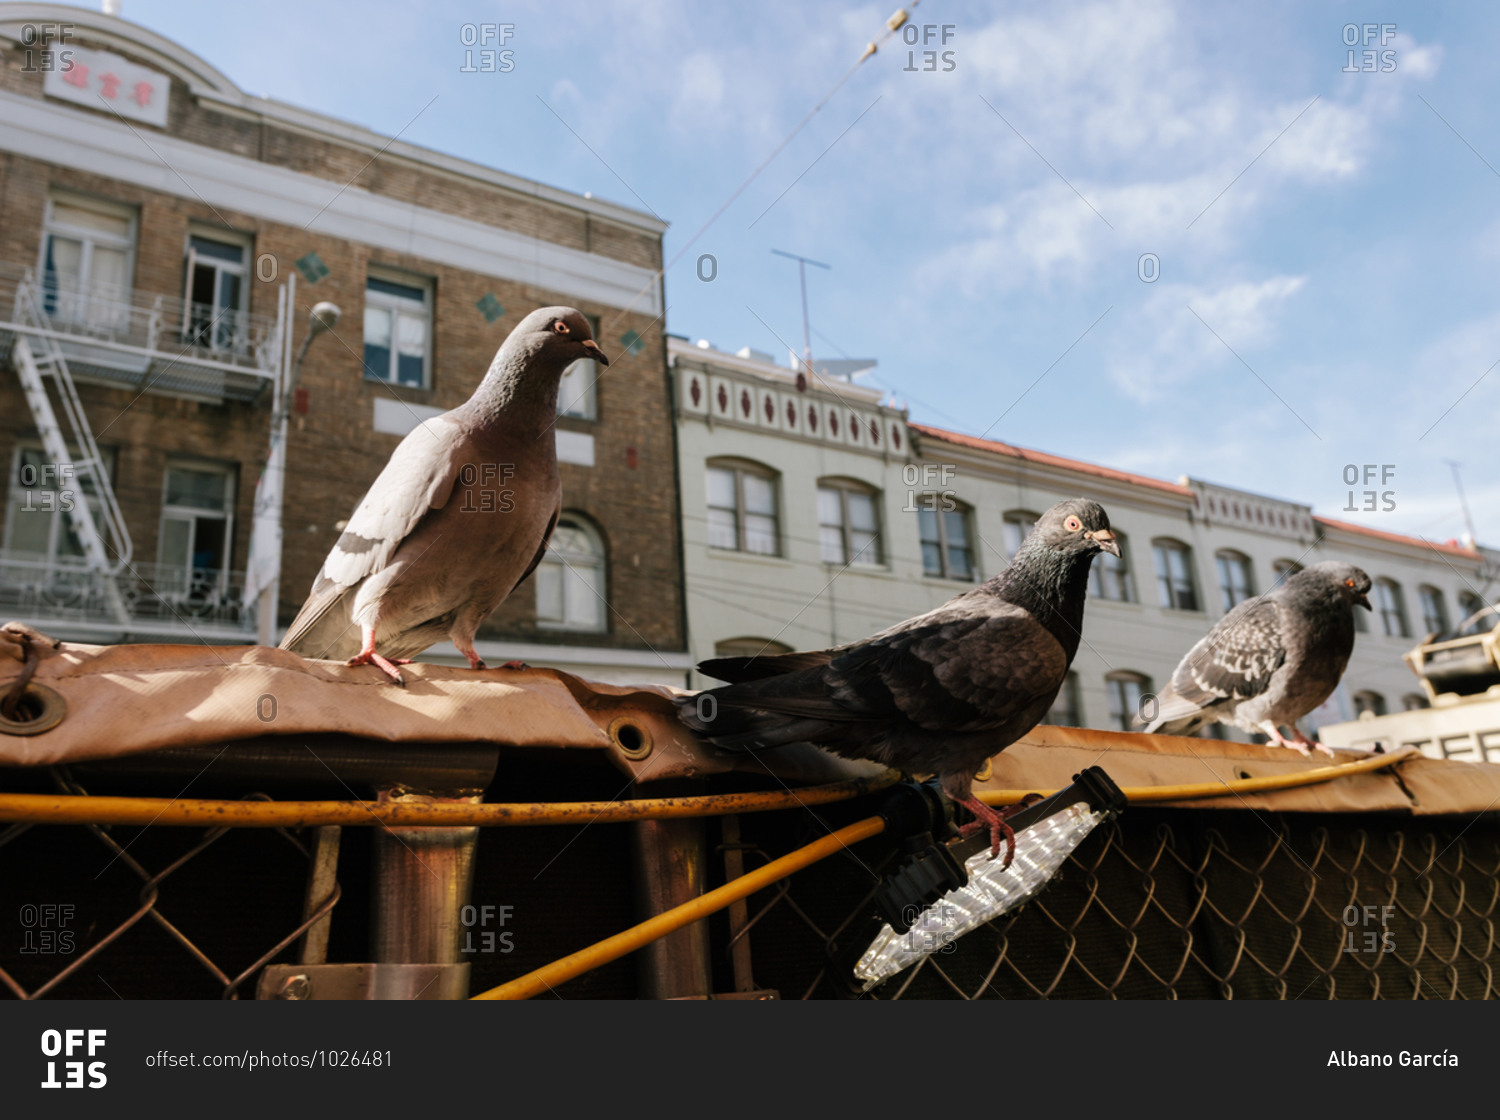 Pigeons perched on a construction fence in urban setting